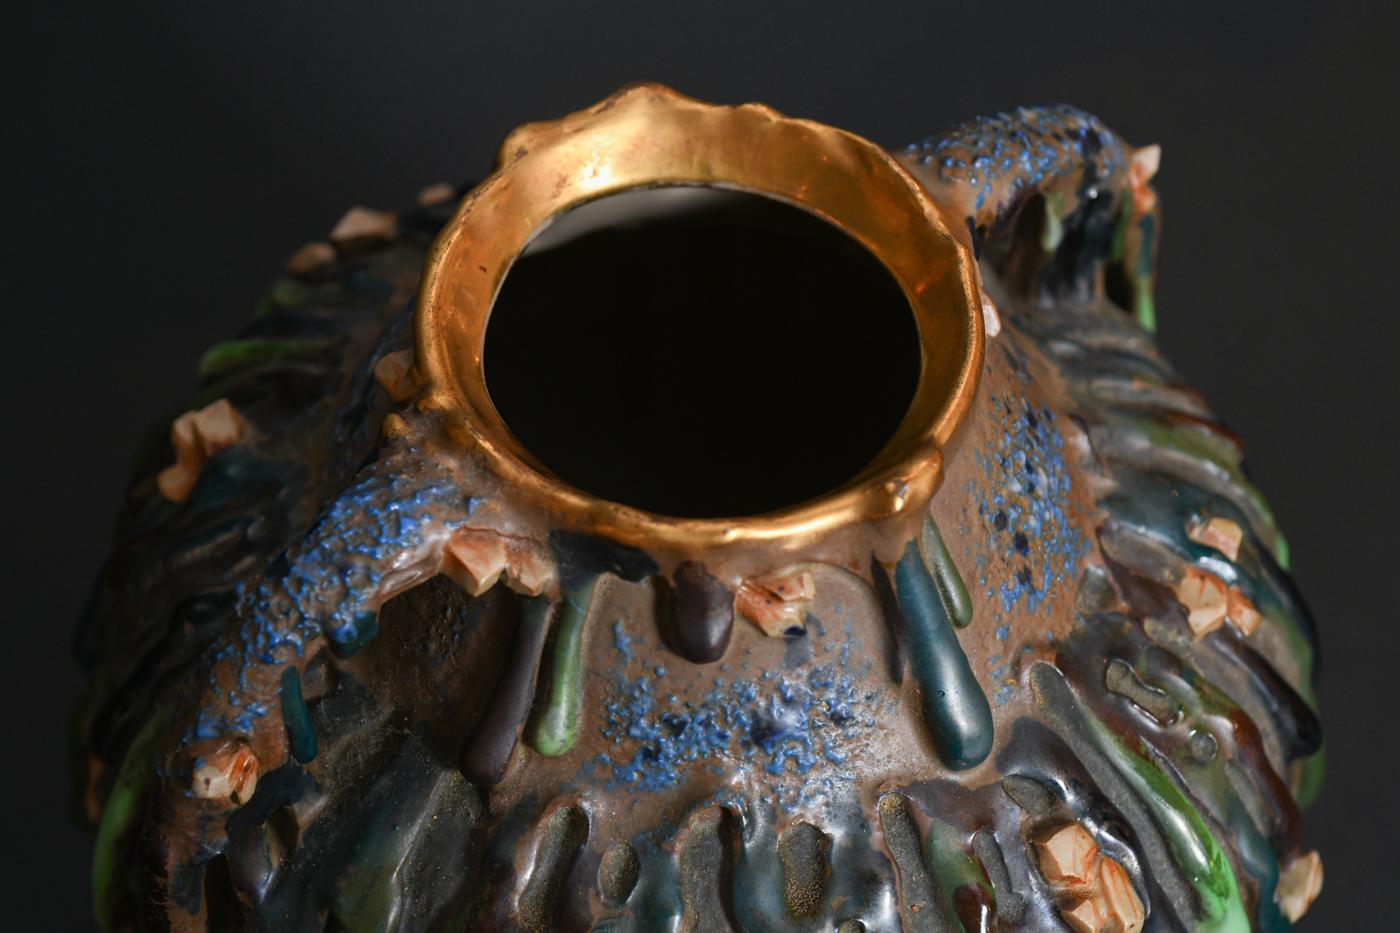 The virtuosic blending of color and texture shows how inventive decoration can triumph over nondescript form. Brightly colored drips of slurry clay cascade like melted wax down the two-handled jug-like body, whose shoulder and lower body exhibit